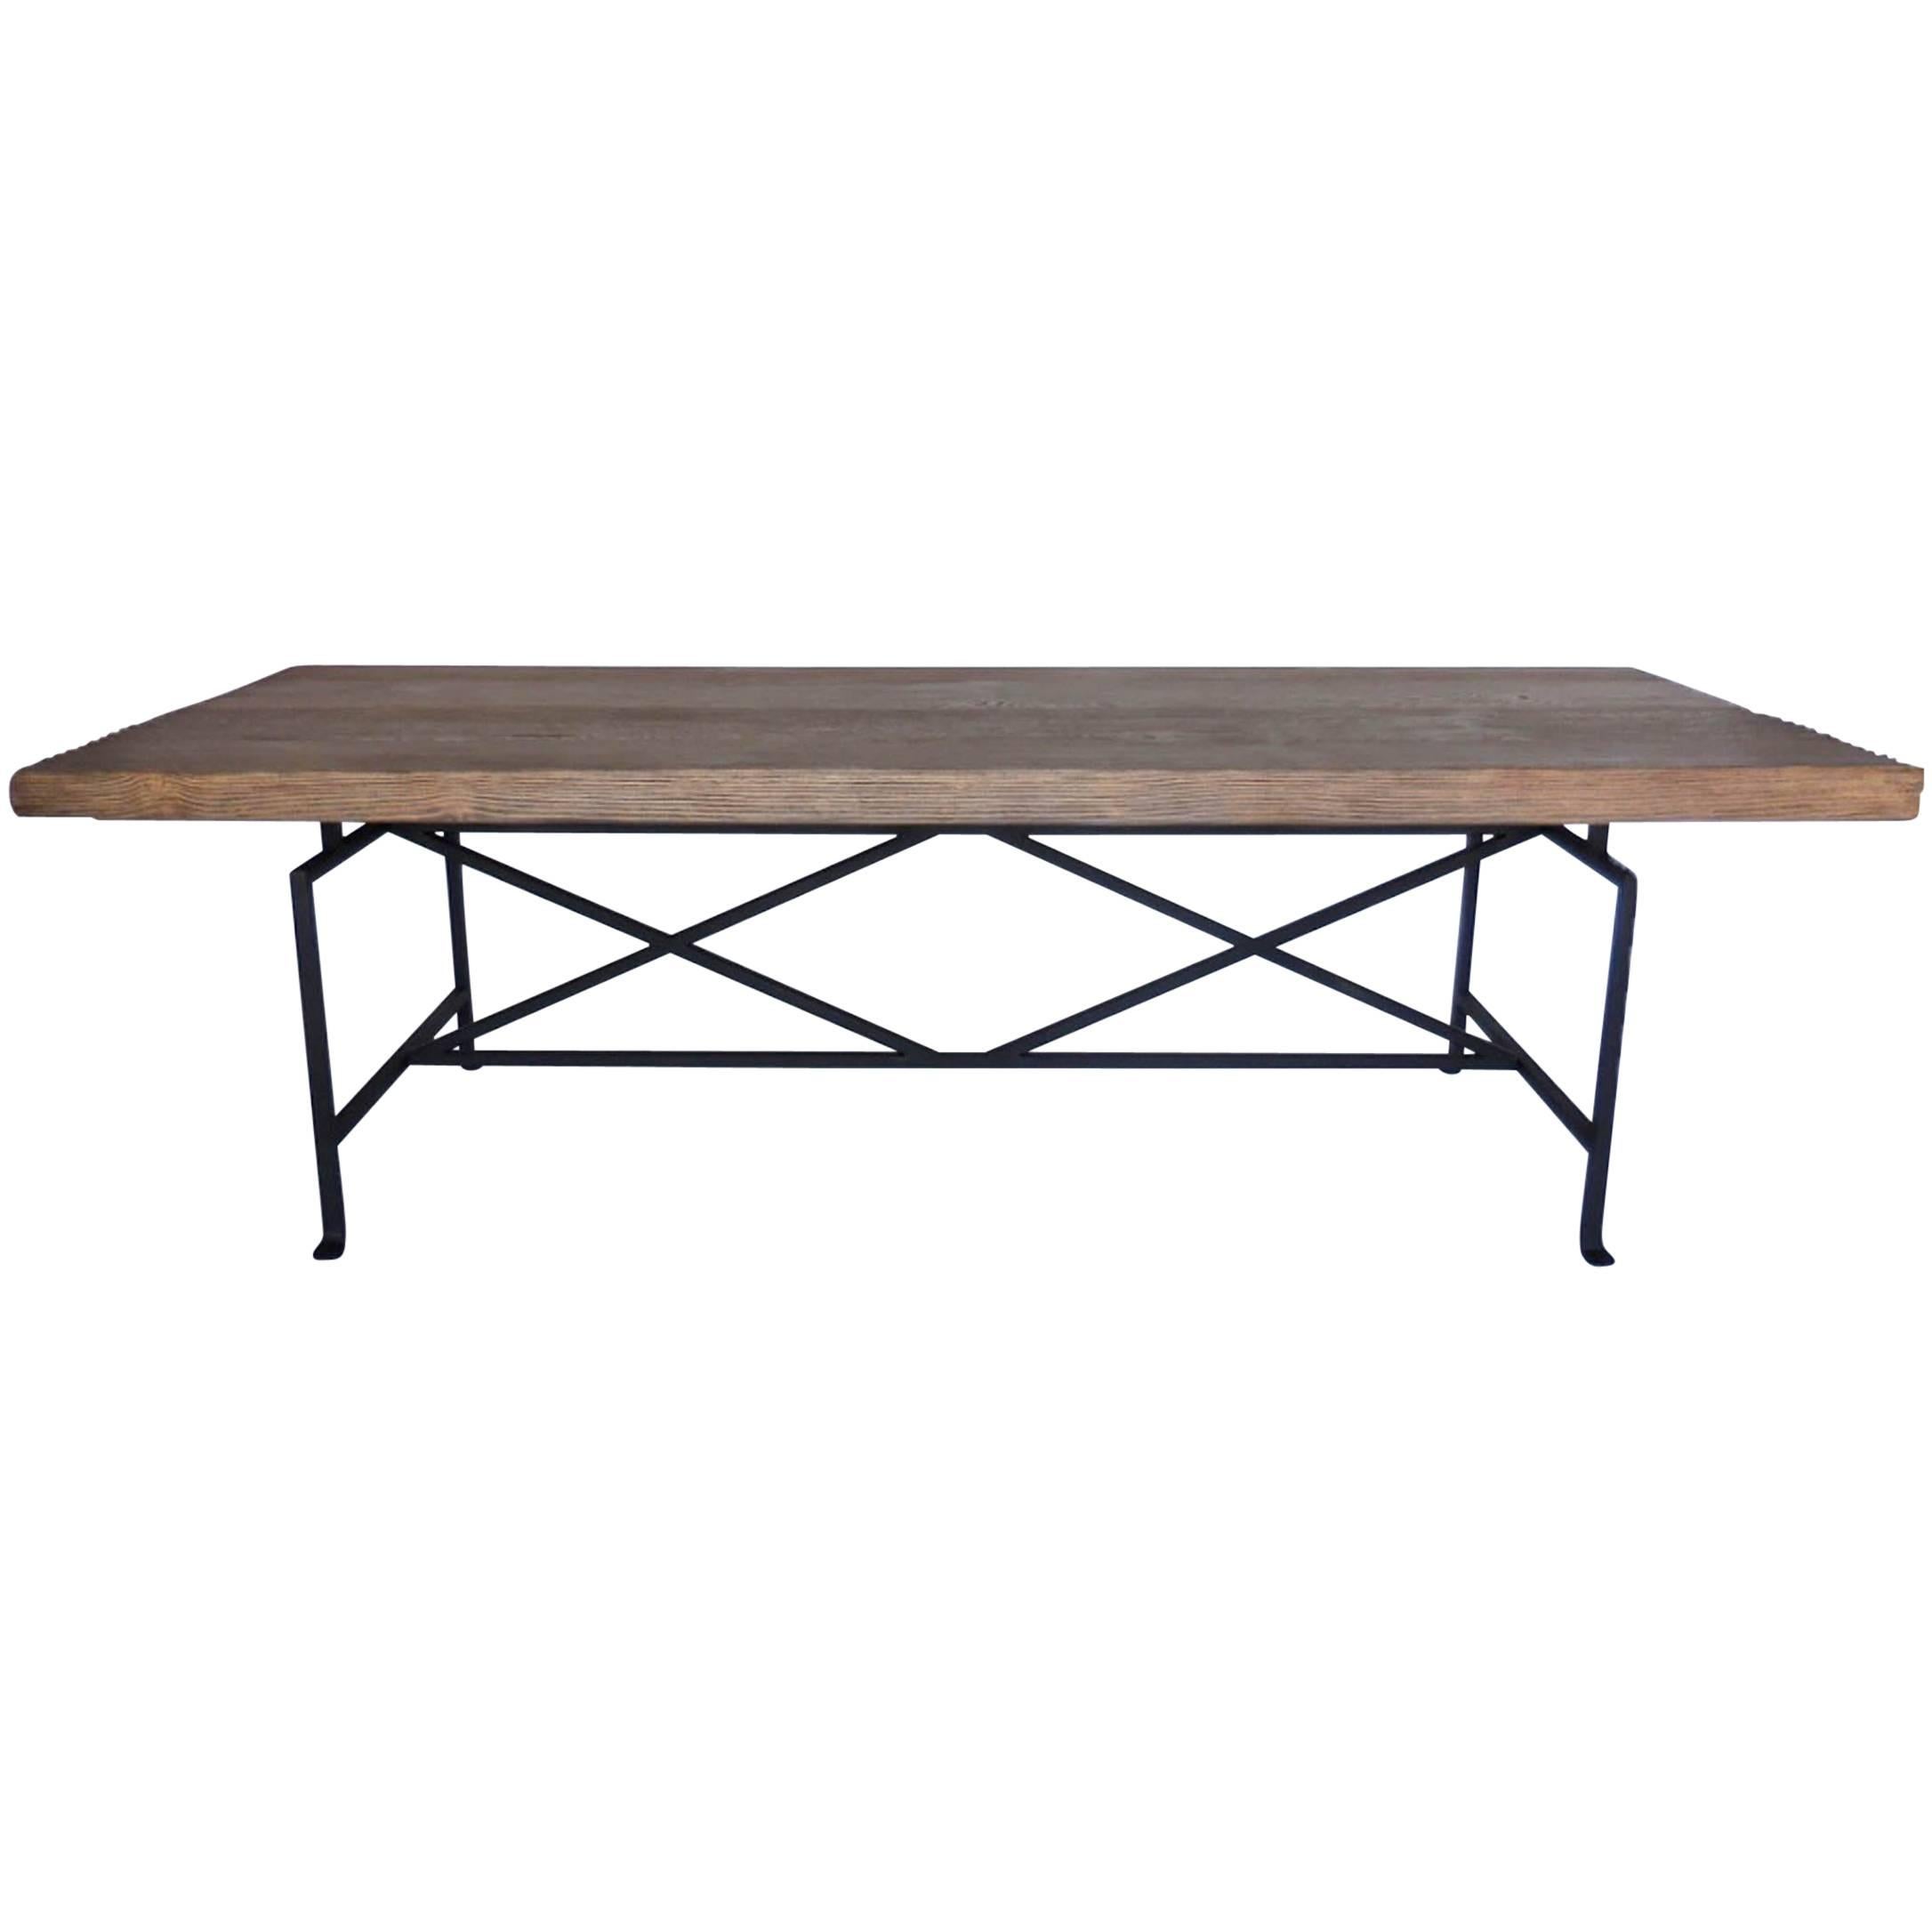 Dos Gallos Custom Reclaimed Wood Table with Iron Base